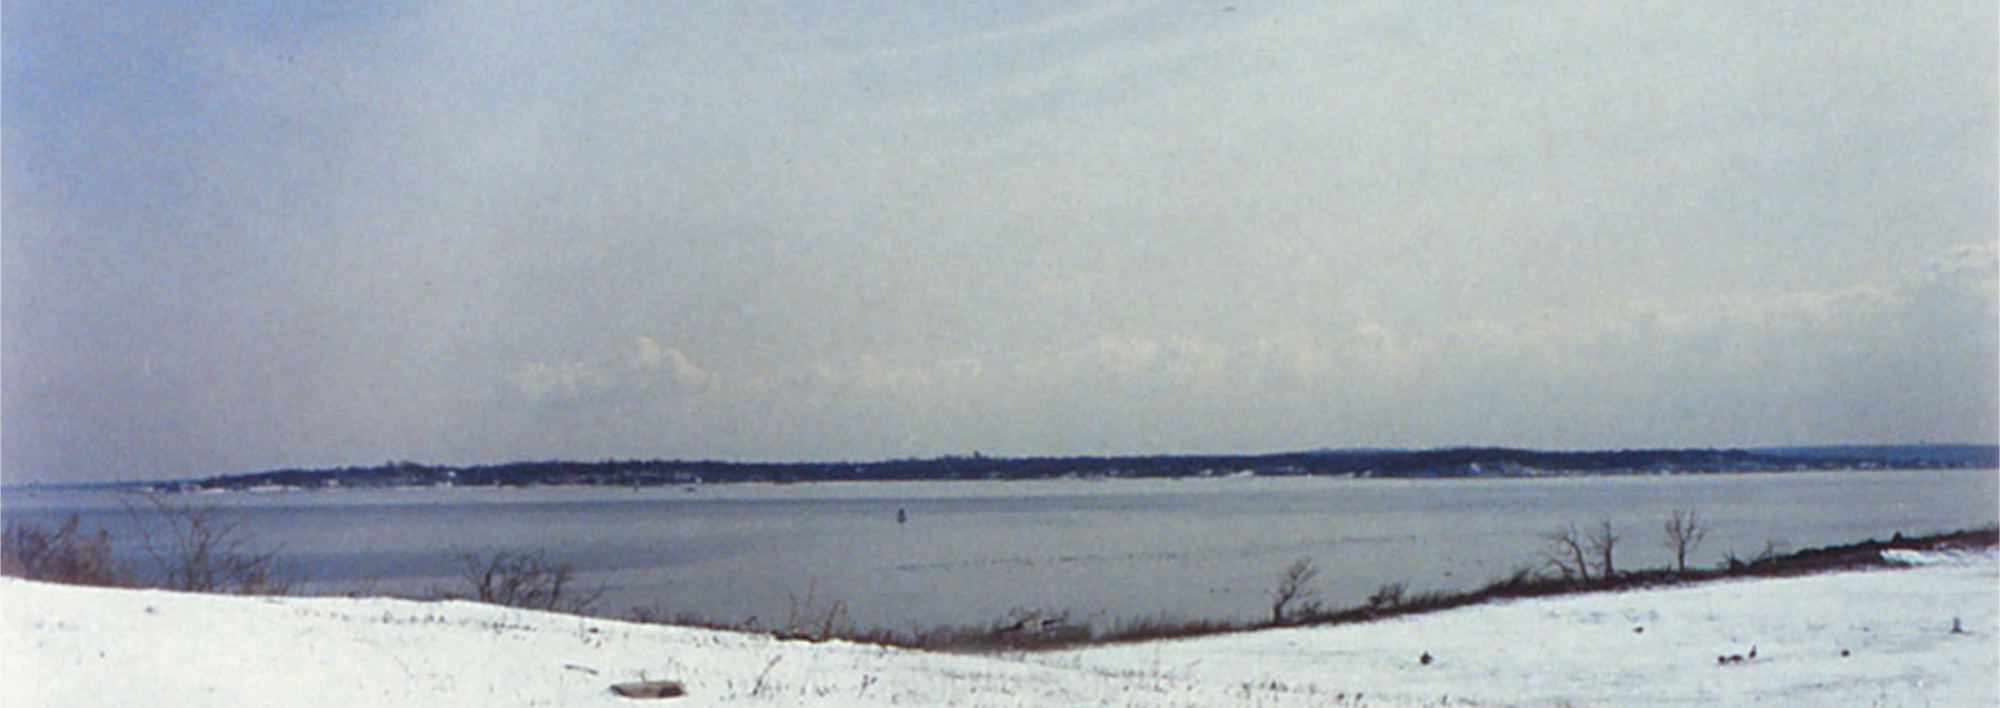 Image of Hart Island with snow